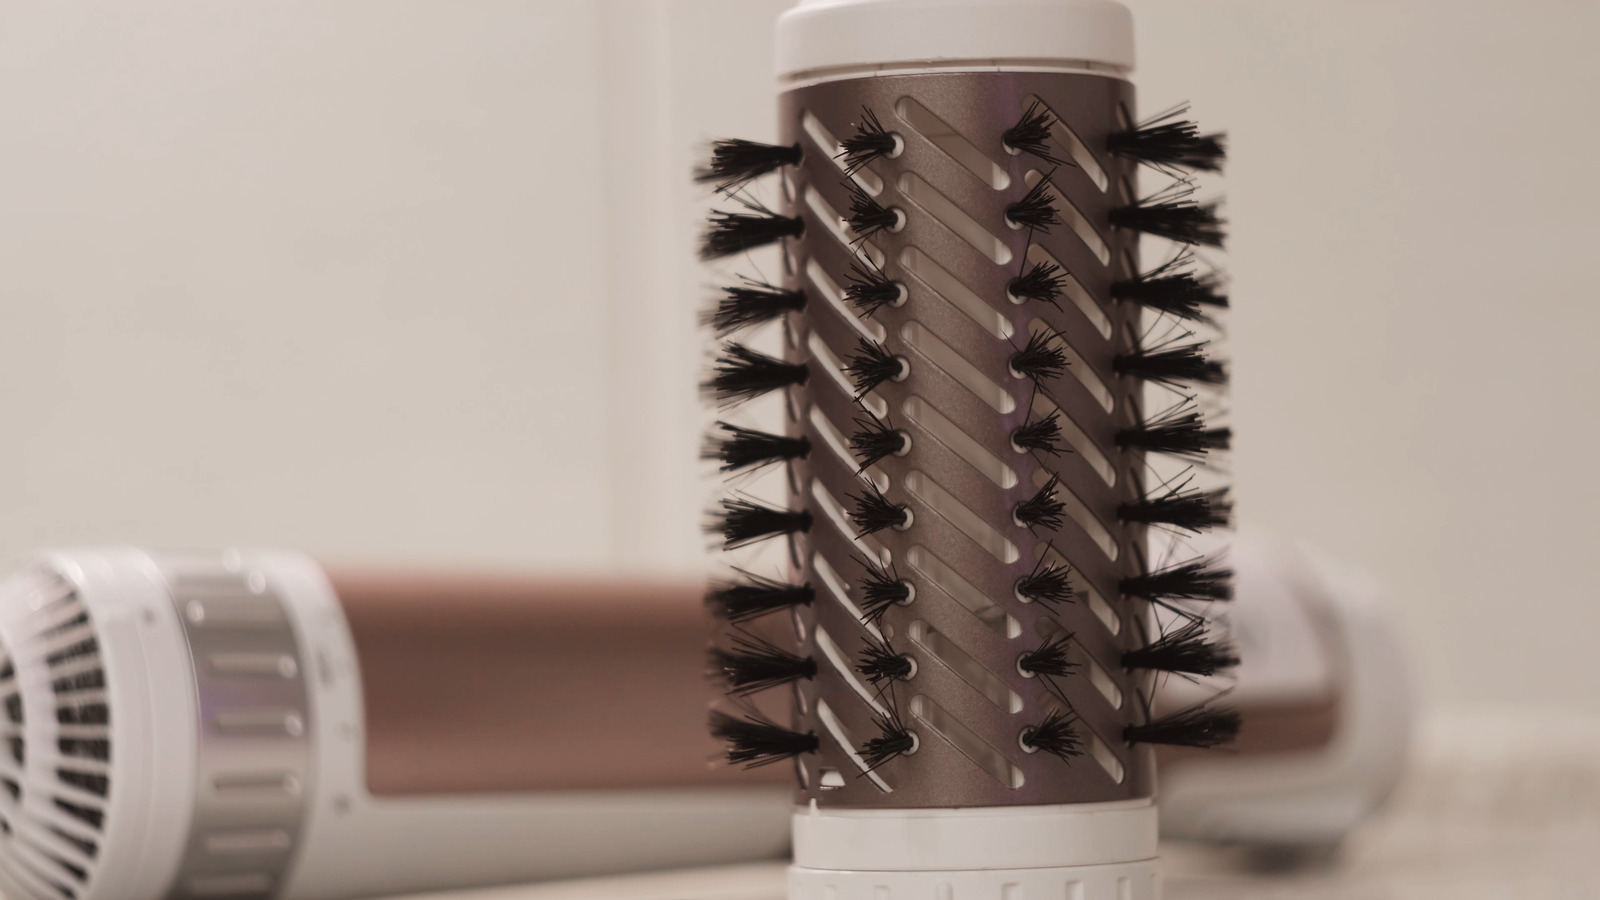 What You Should Know About The Revlon Hair Dryer Brush